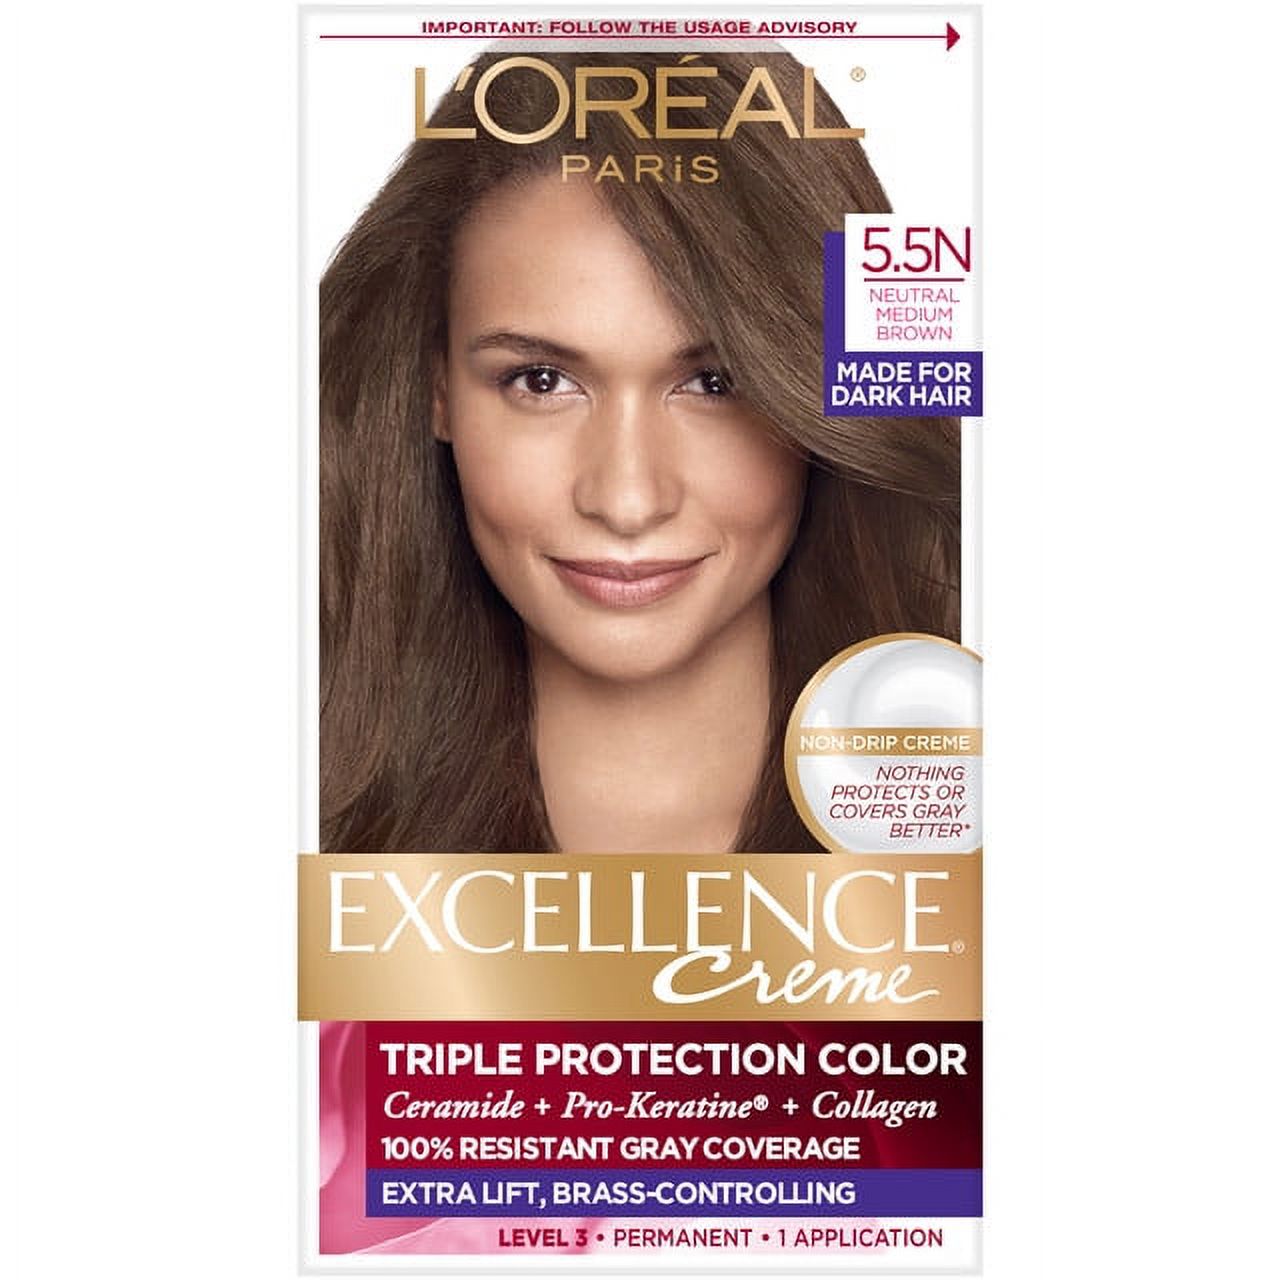 Loreal Excellence Triple Protection Color Creme Haircolor - 5.5N Neutral Brown (2-Pack) - image 1 of 3